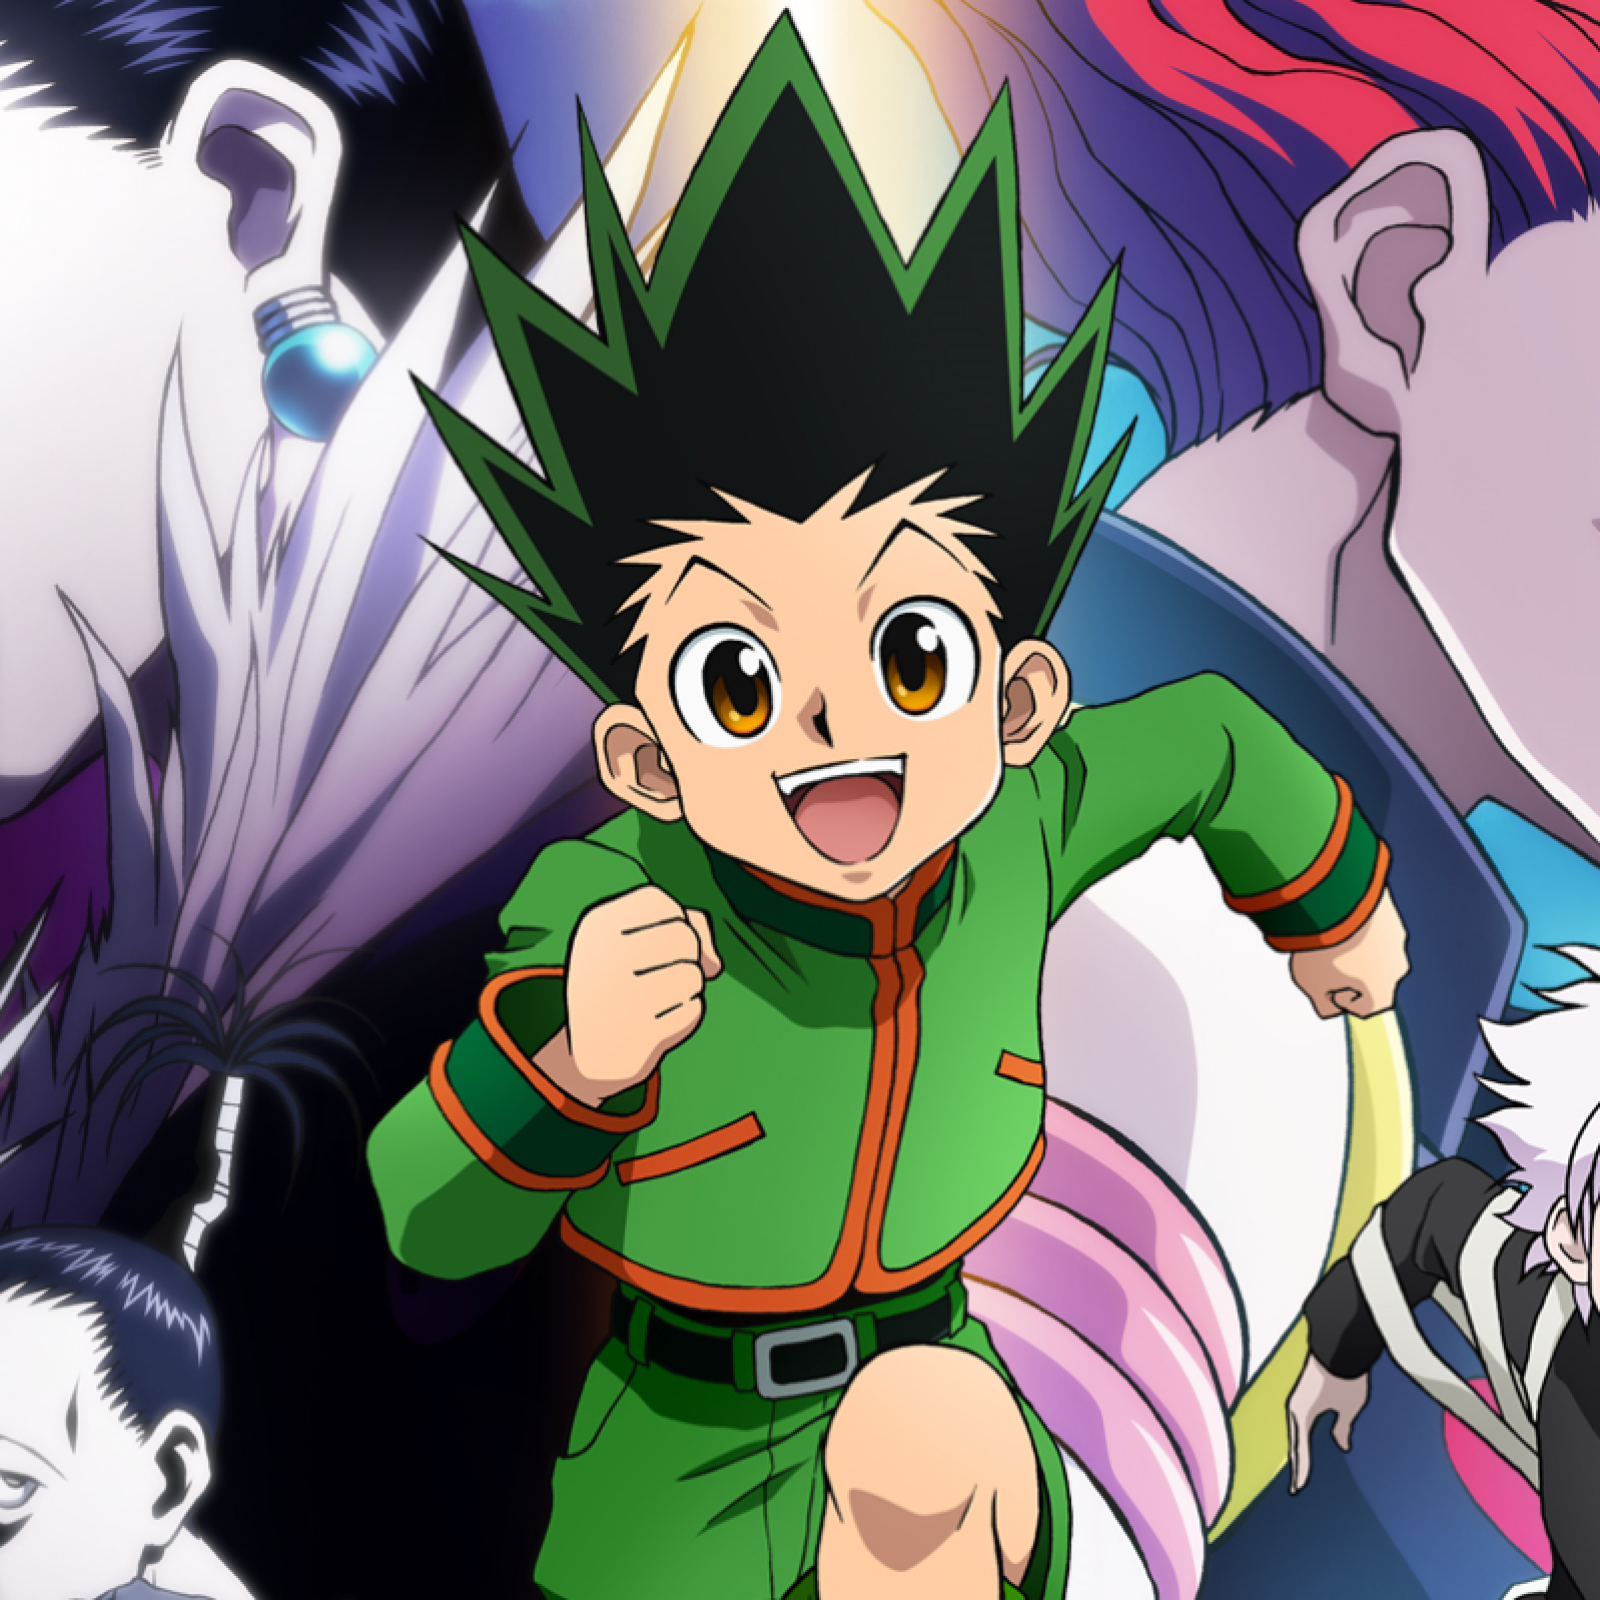 10 characters fans want to see when Hunter x Hunter manga returns